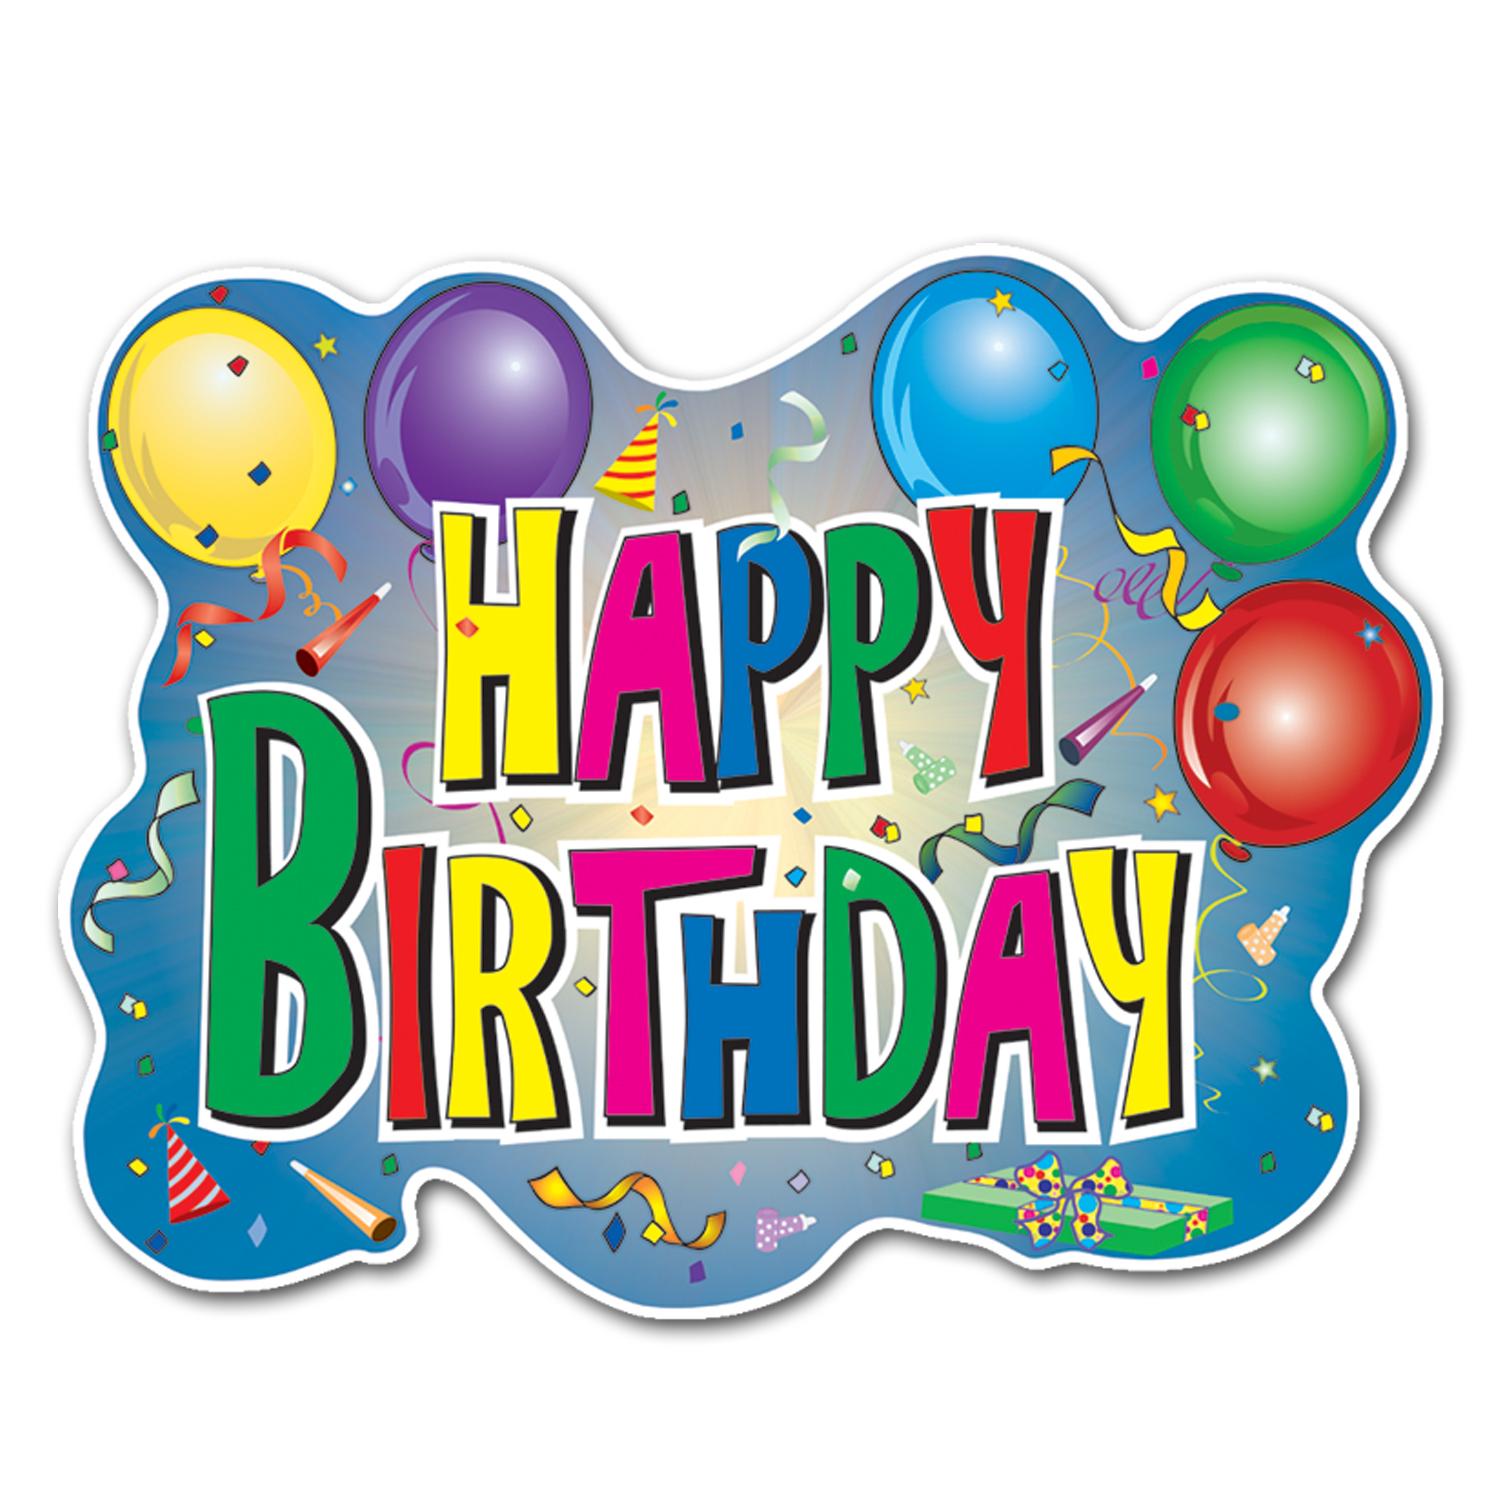 6 Best Images of Printable Birthday Party Sign Happy Birthday Signs